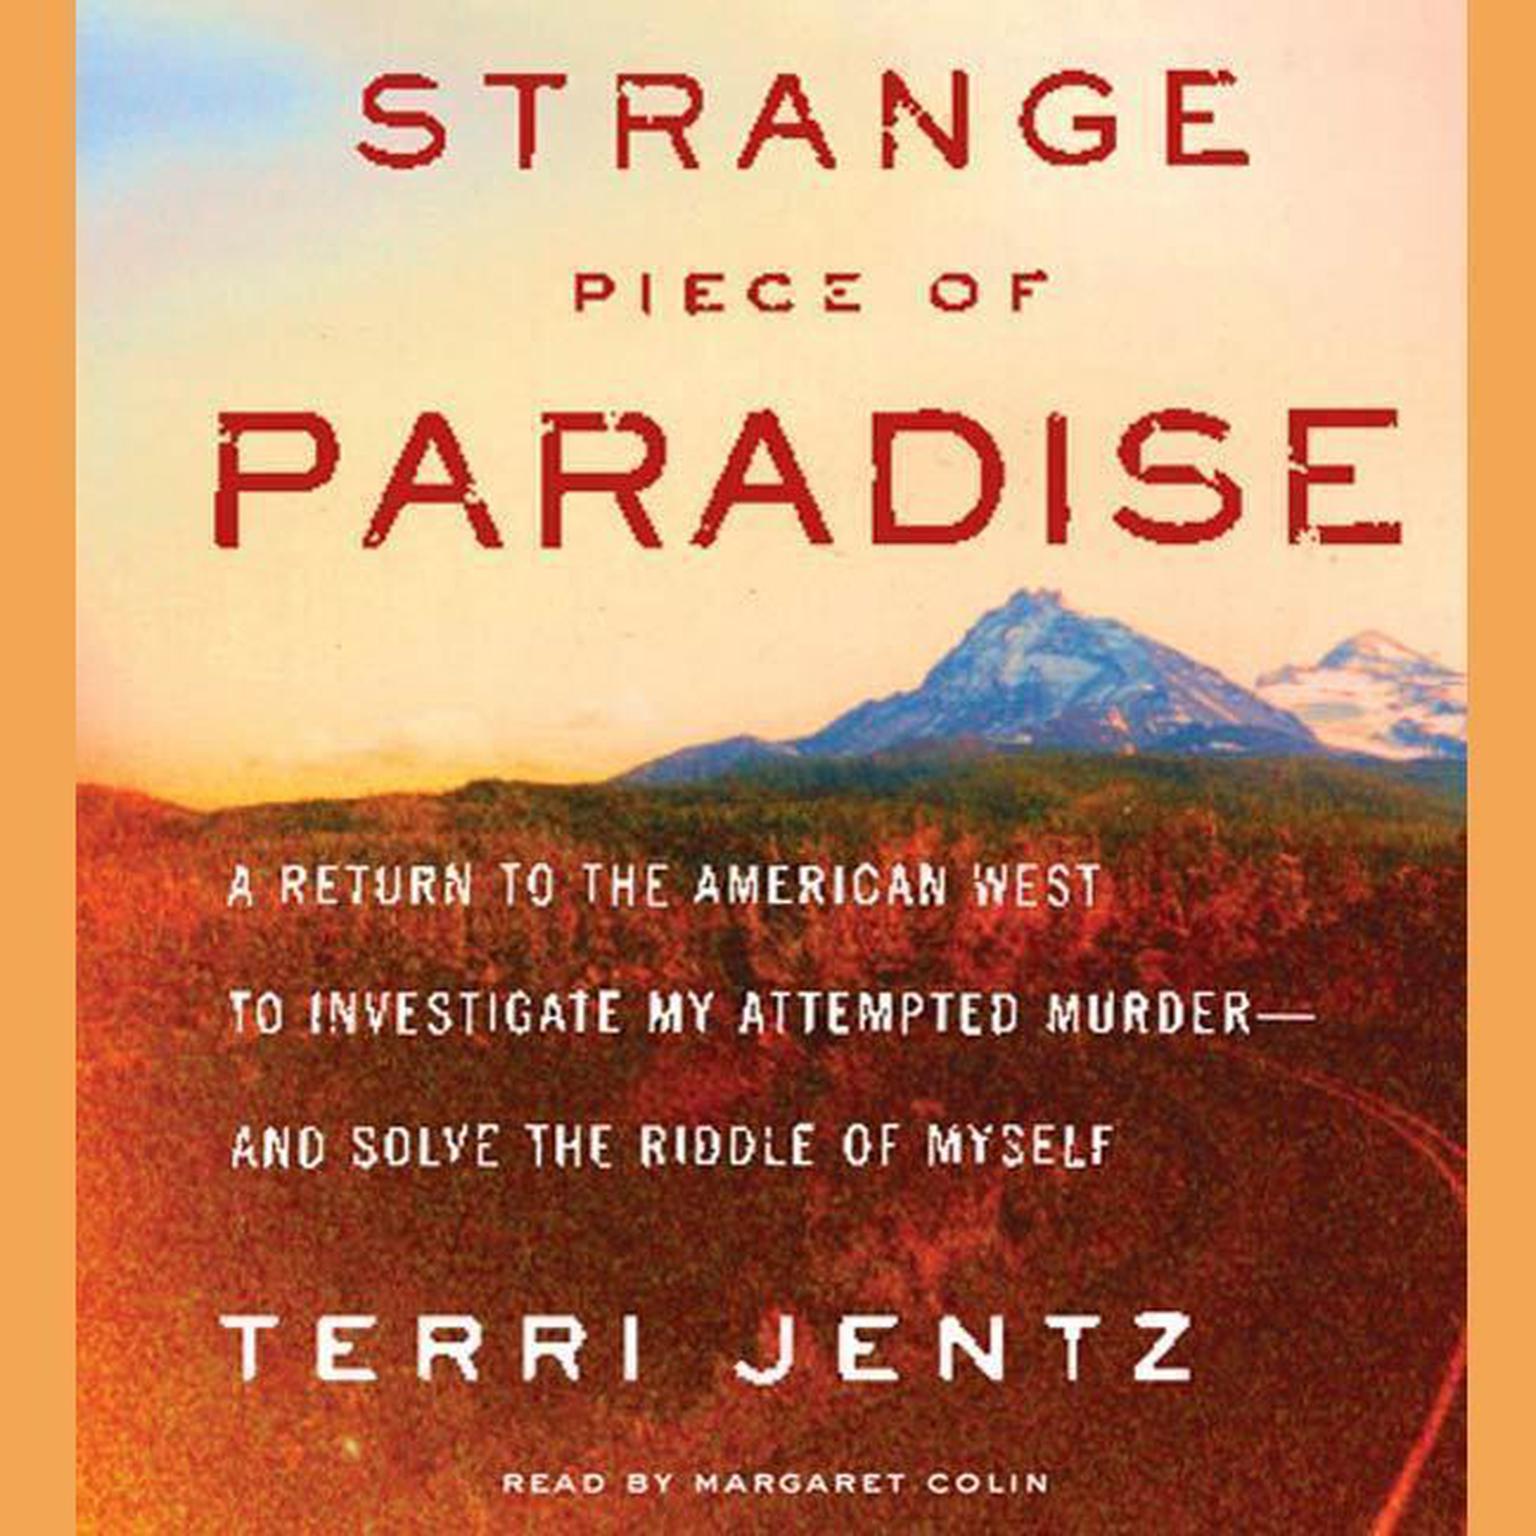 Strange Piece of Paradise (Abridged): A Return to the American West To Investigate My Attempted Murder - and Solve the Riddle of Myself Audiobook, by Terri Jentz